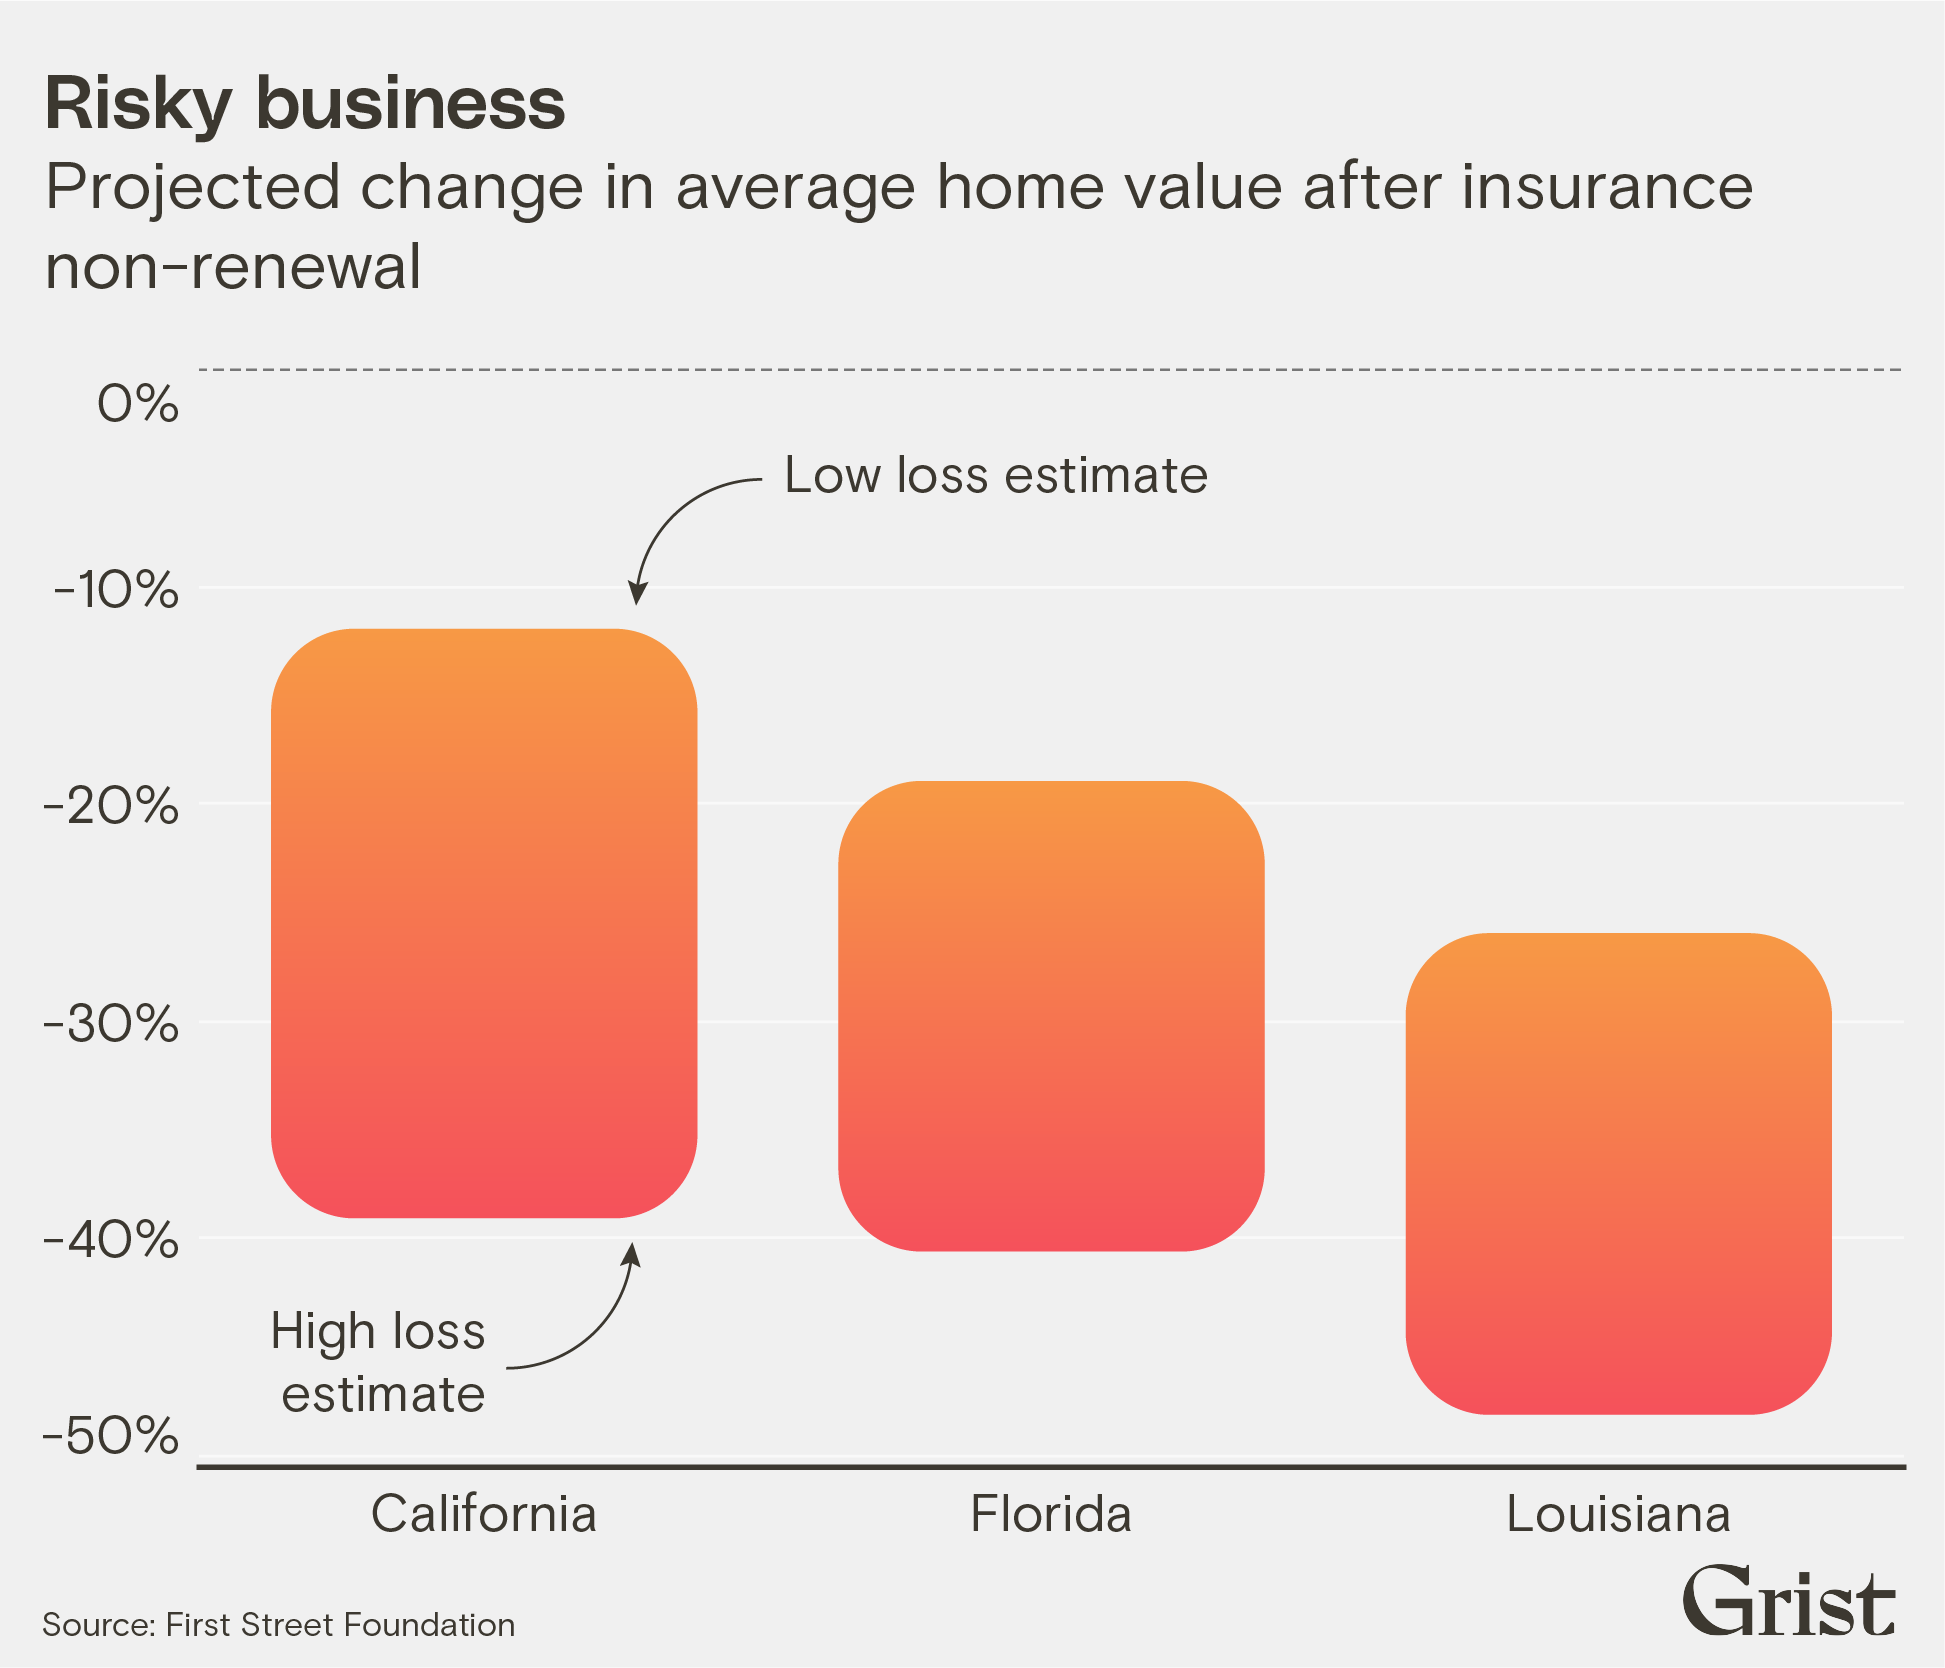 A chart showing the projected change in average home value after insurance non-renewal for homes in California, Florida, and Louisiana. Immediate potential losses range from 10% to nearly 50% of home values.